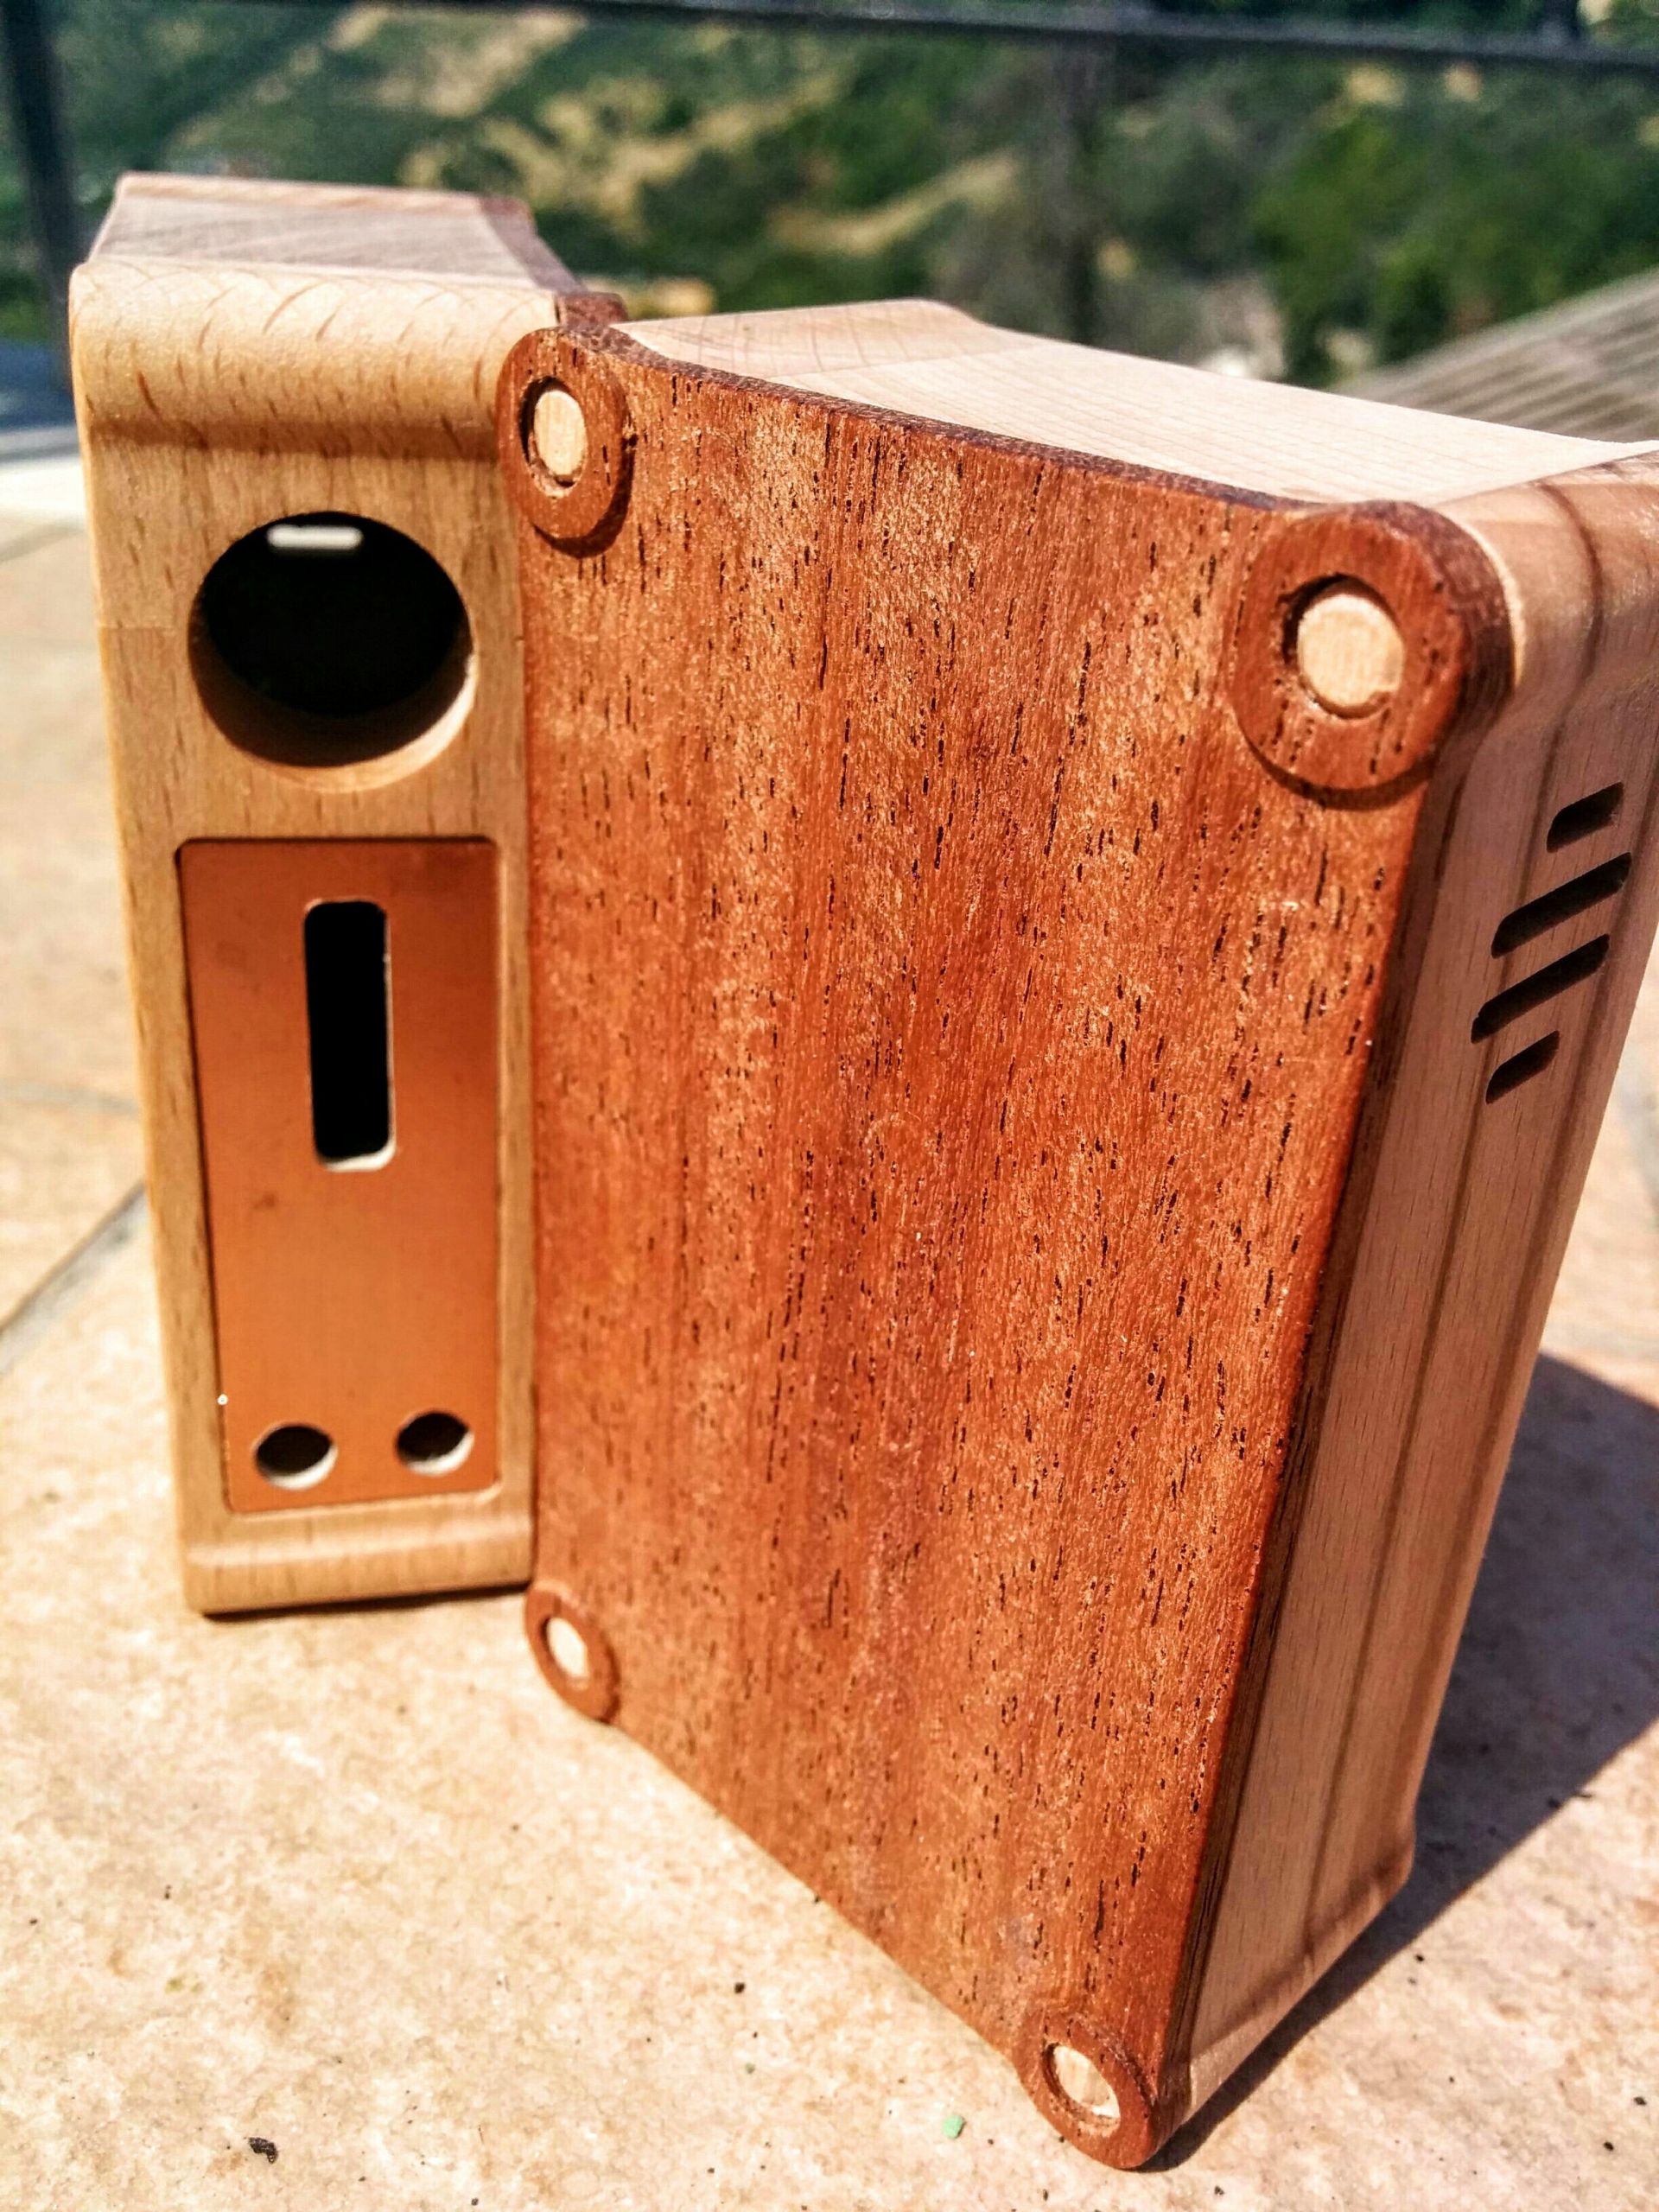 DIY Wooden Box Mod
 Pin by Anthony Lusk on Mods